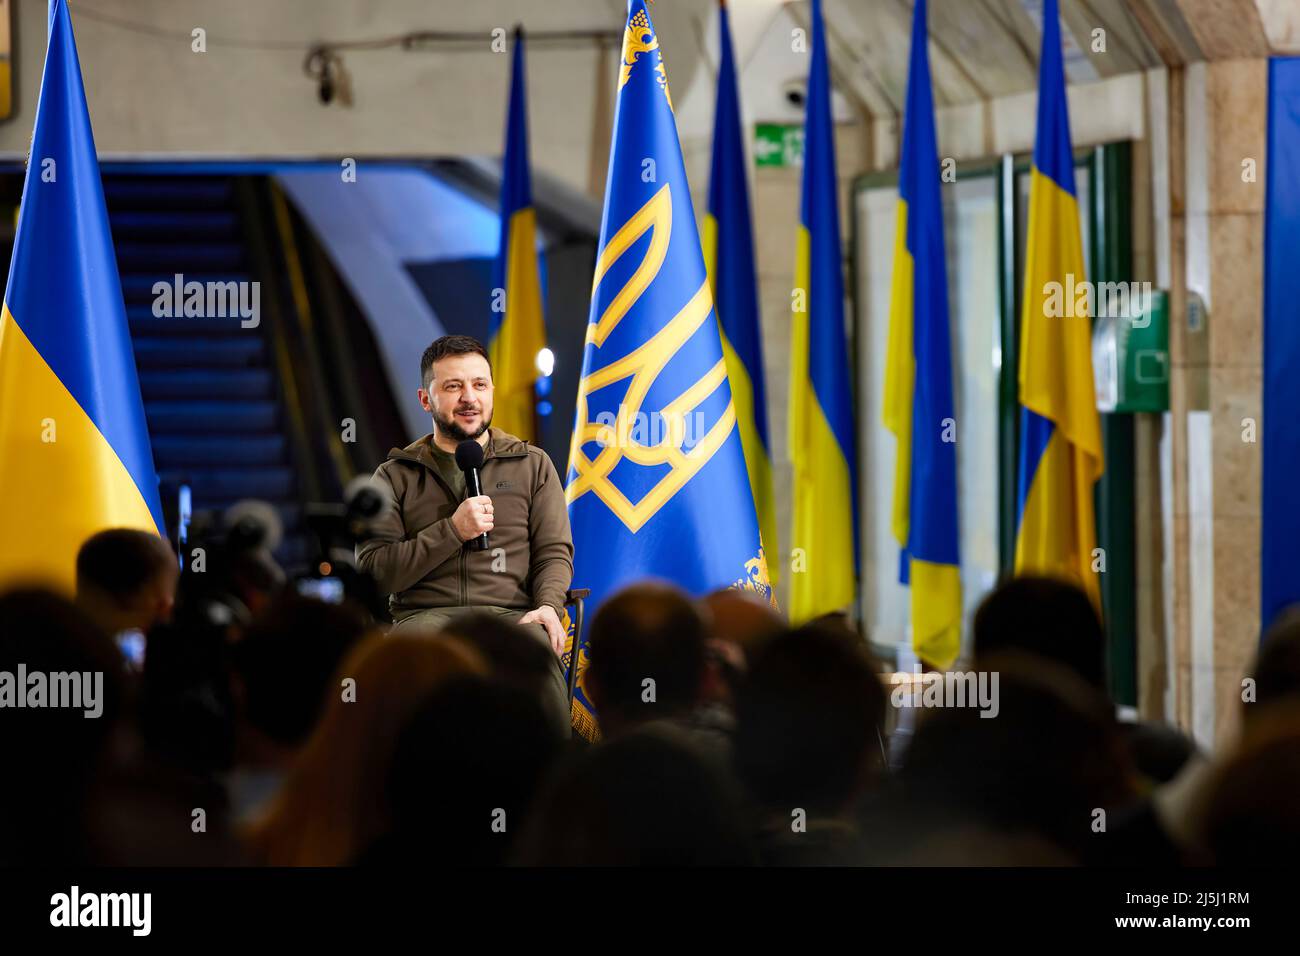 Ukraine President Volodymyr Zelensky holds a two hour long press conference for the international media in a Kyiv, Ukraine subway station. Stock Photo